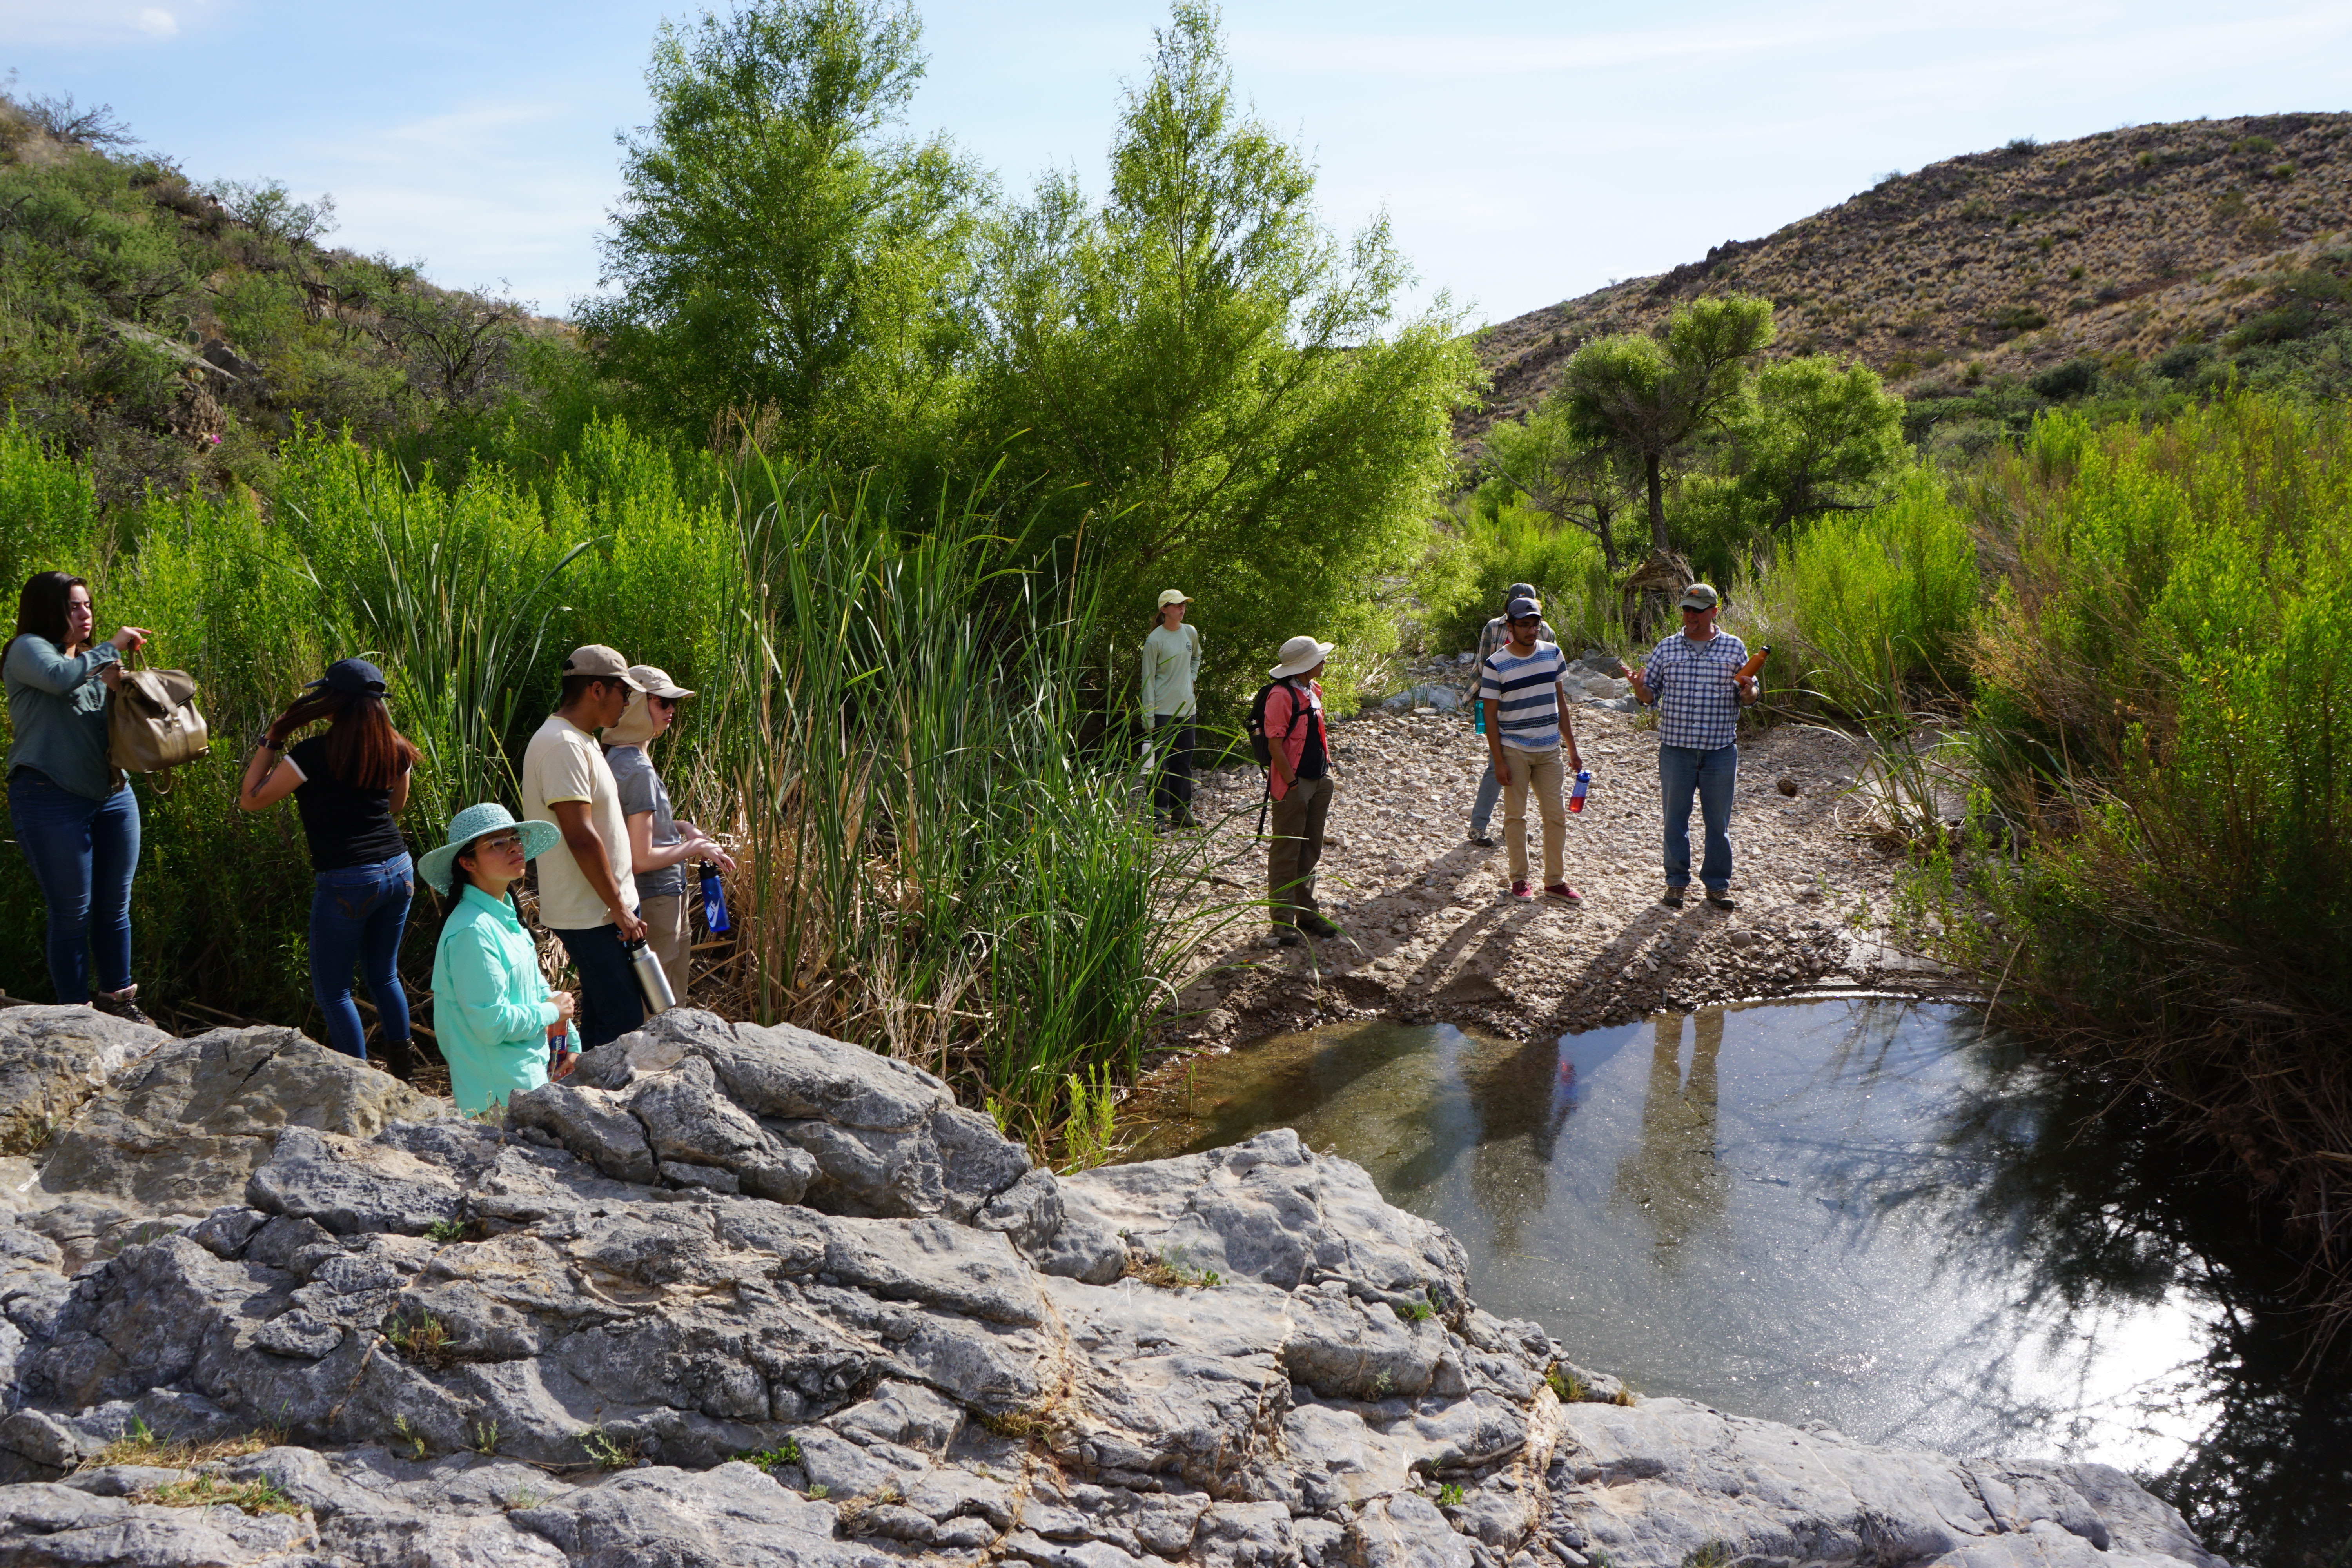 Students gathered around a pond in the field listening to faculty researcher.